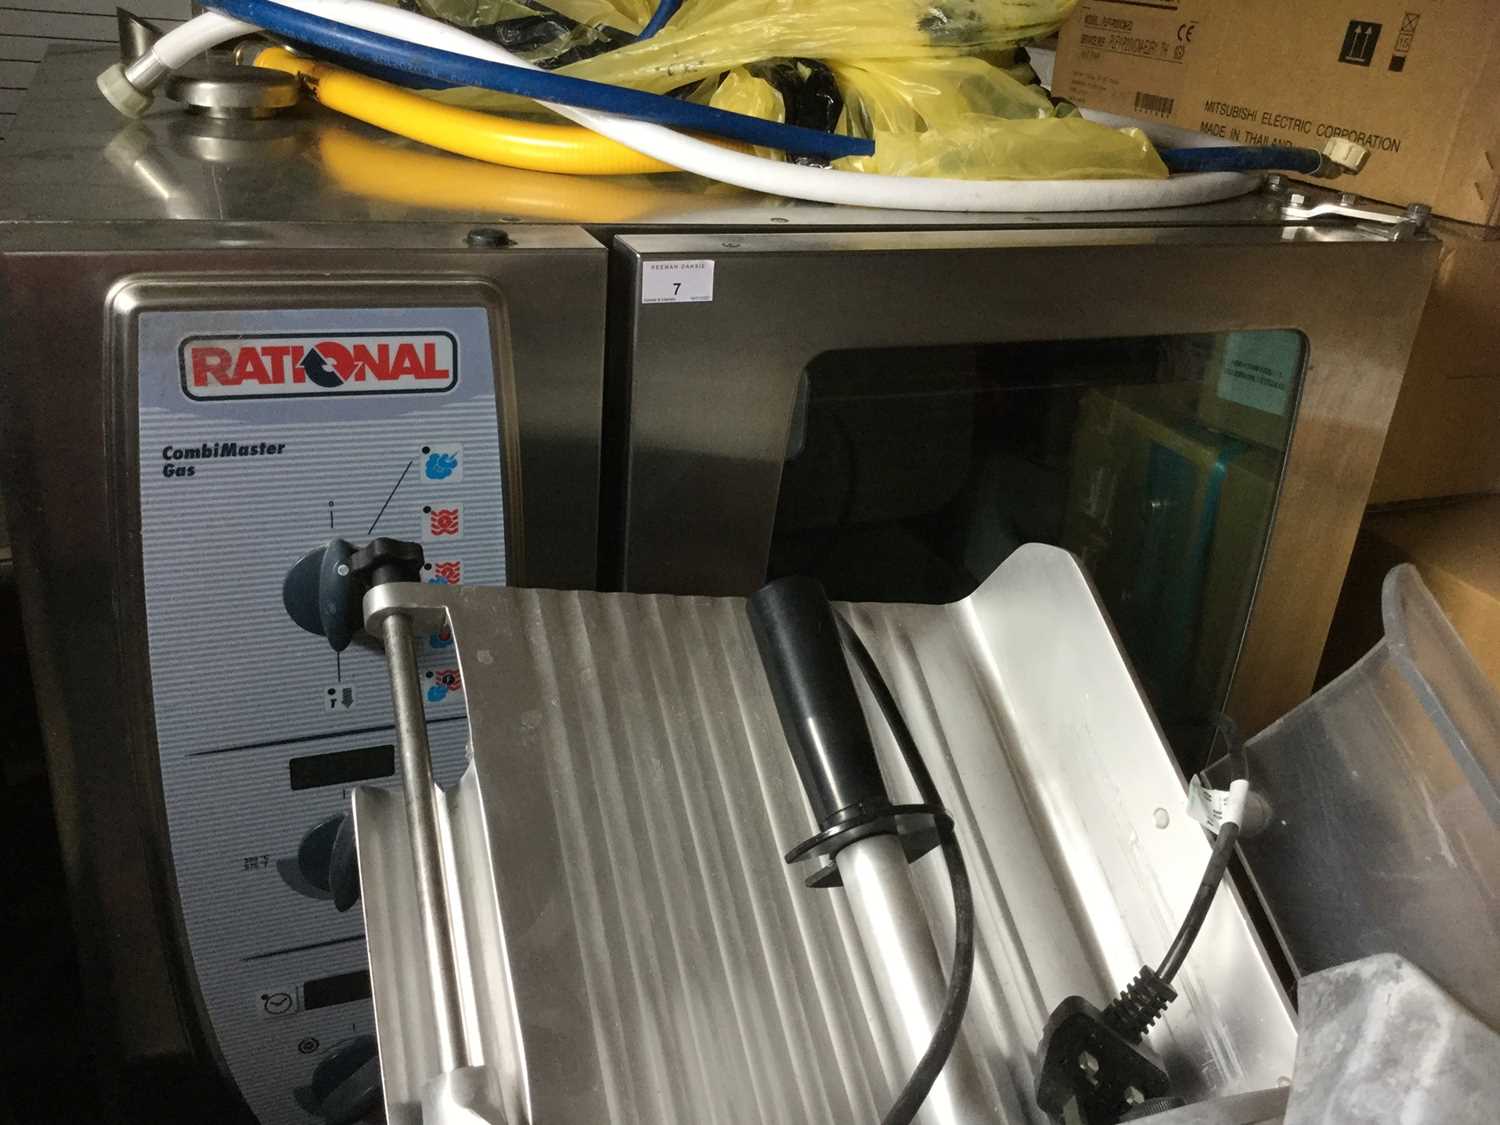 Lot 7 - Rational CombiMaster Gas catering oven